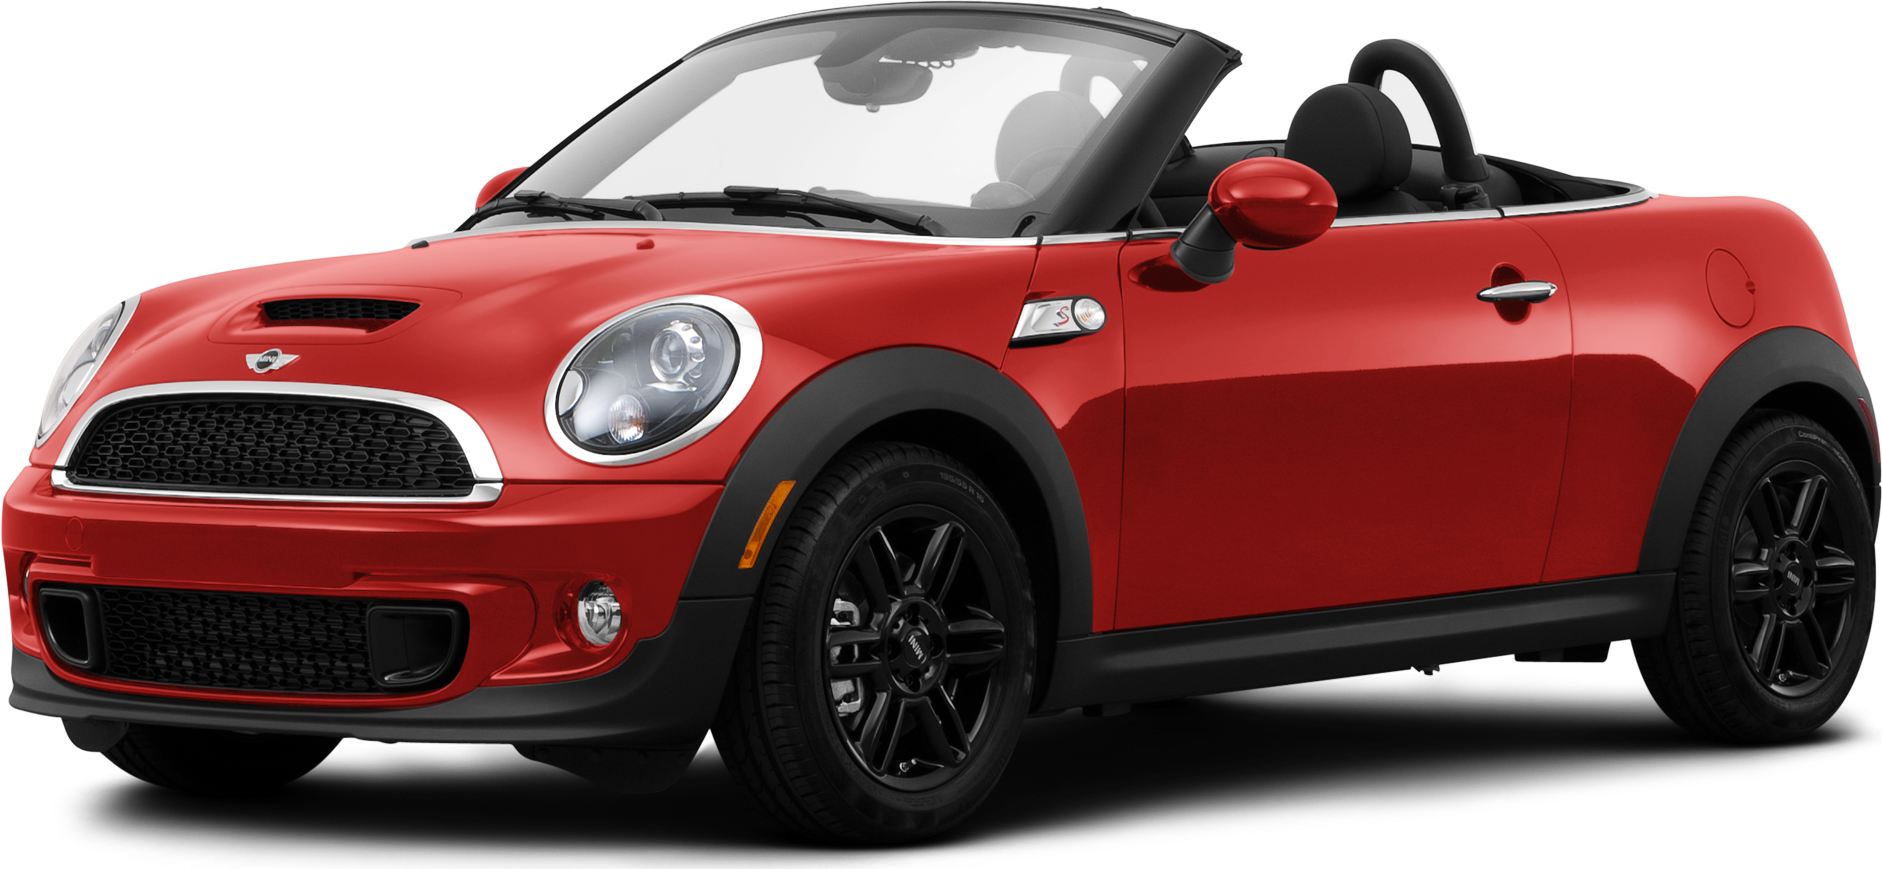 Used 2015 Mini Convertible Values Cars For Sale Kelley Blue Book